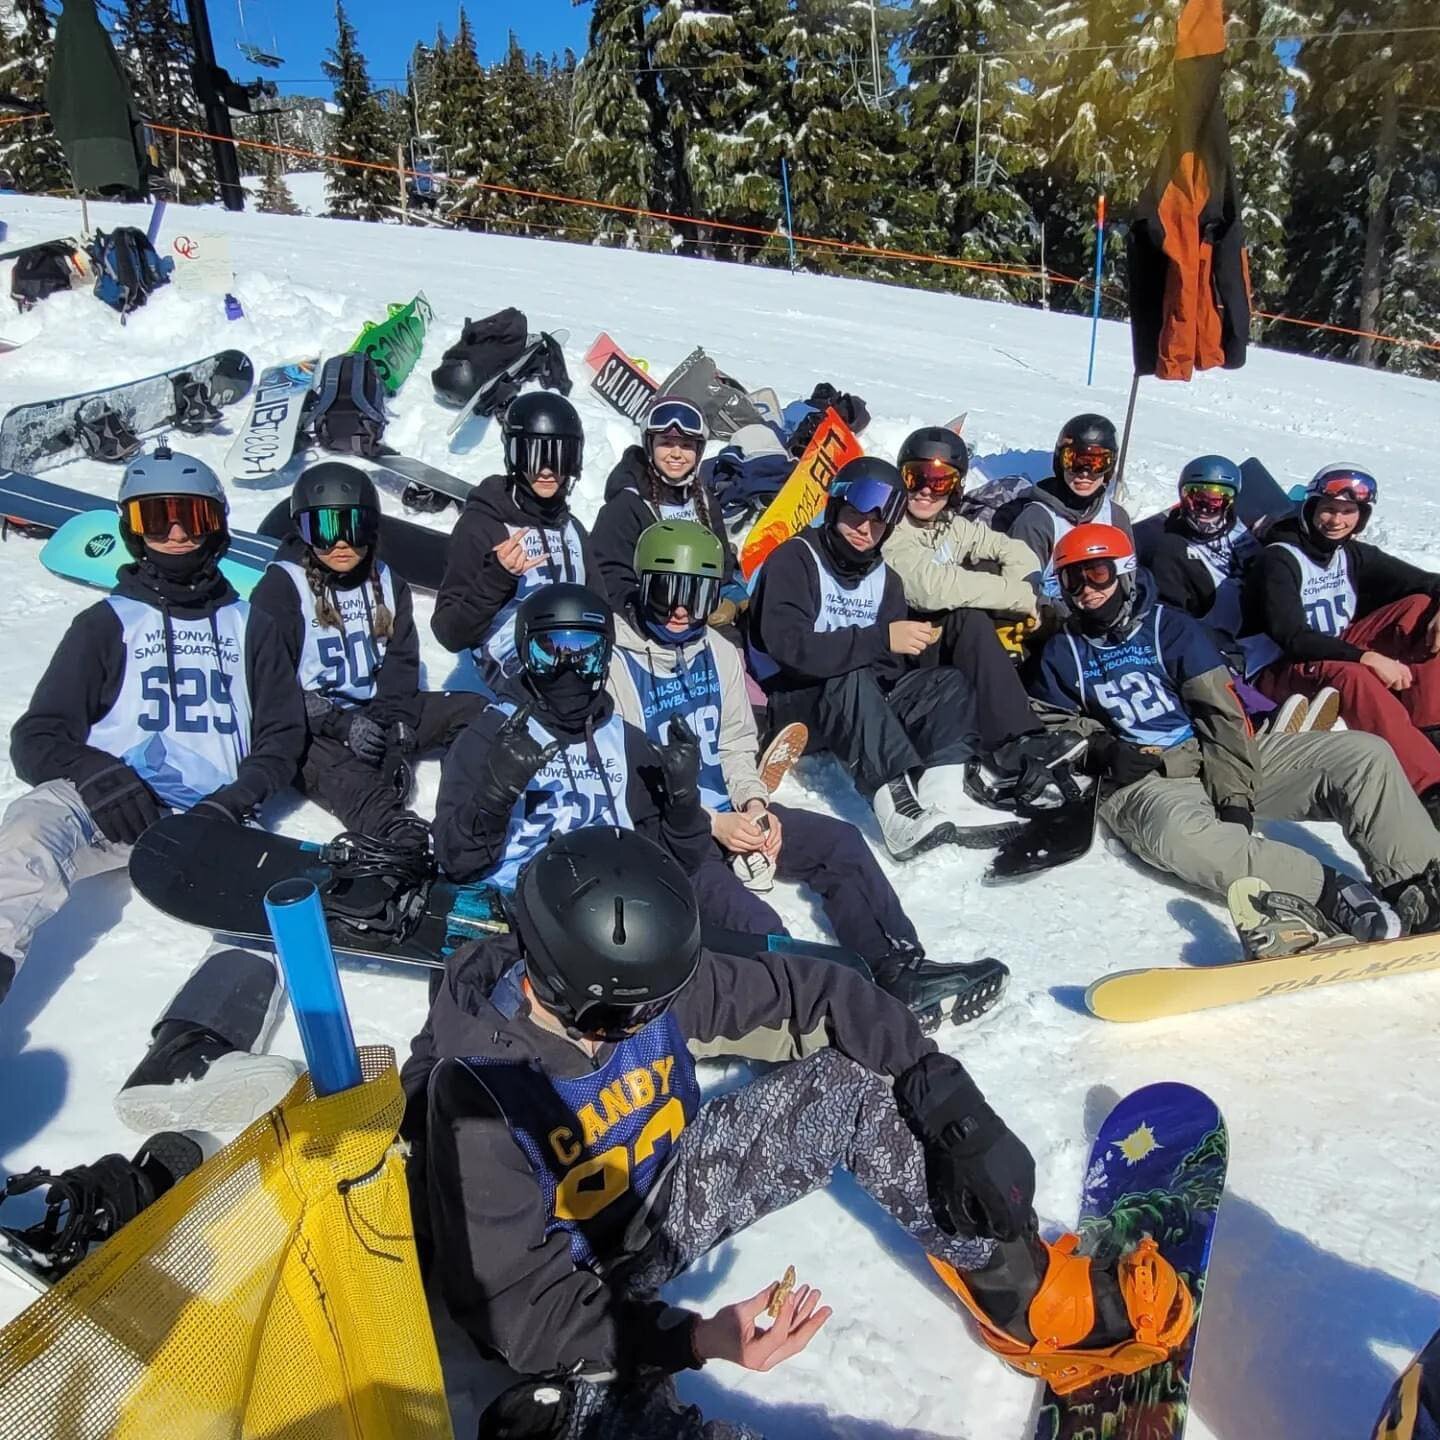 What a great season @wvhs_snowboard_team had this year! 35 kids on the team with the girls winning state. Fun memorable season!